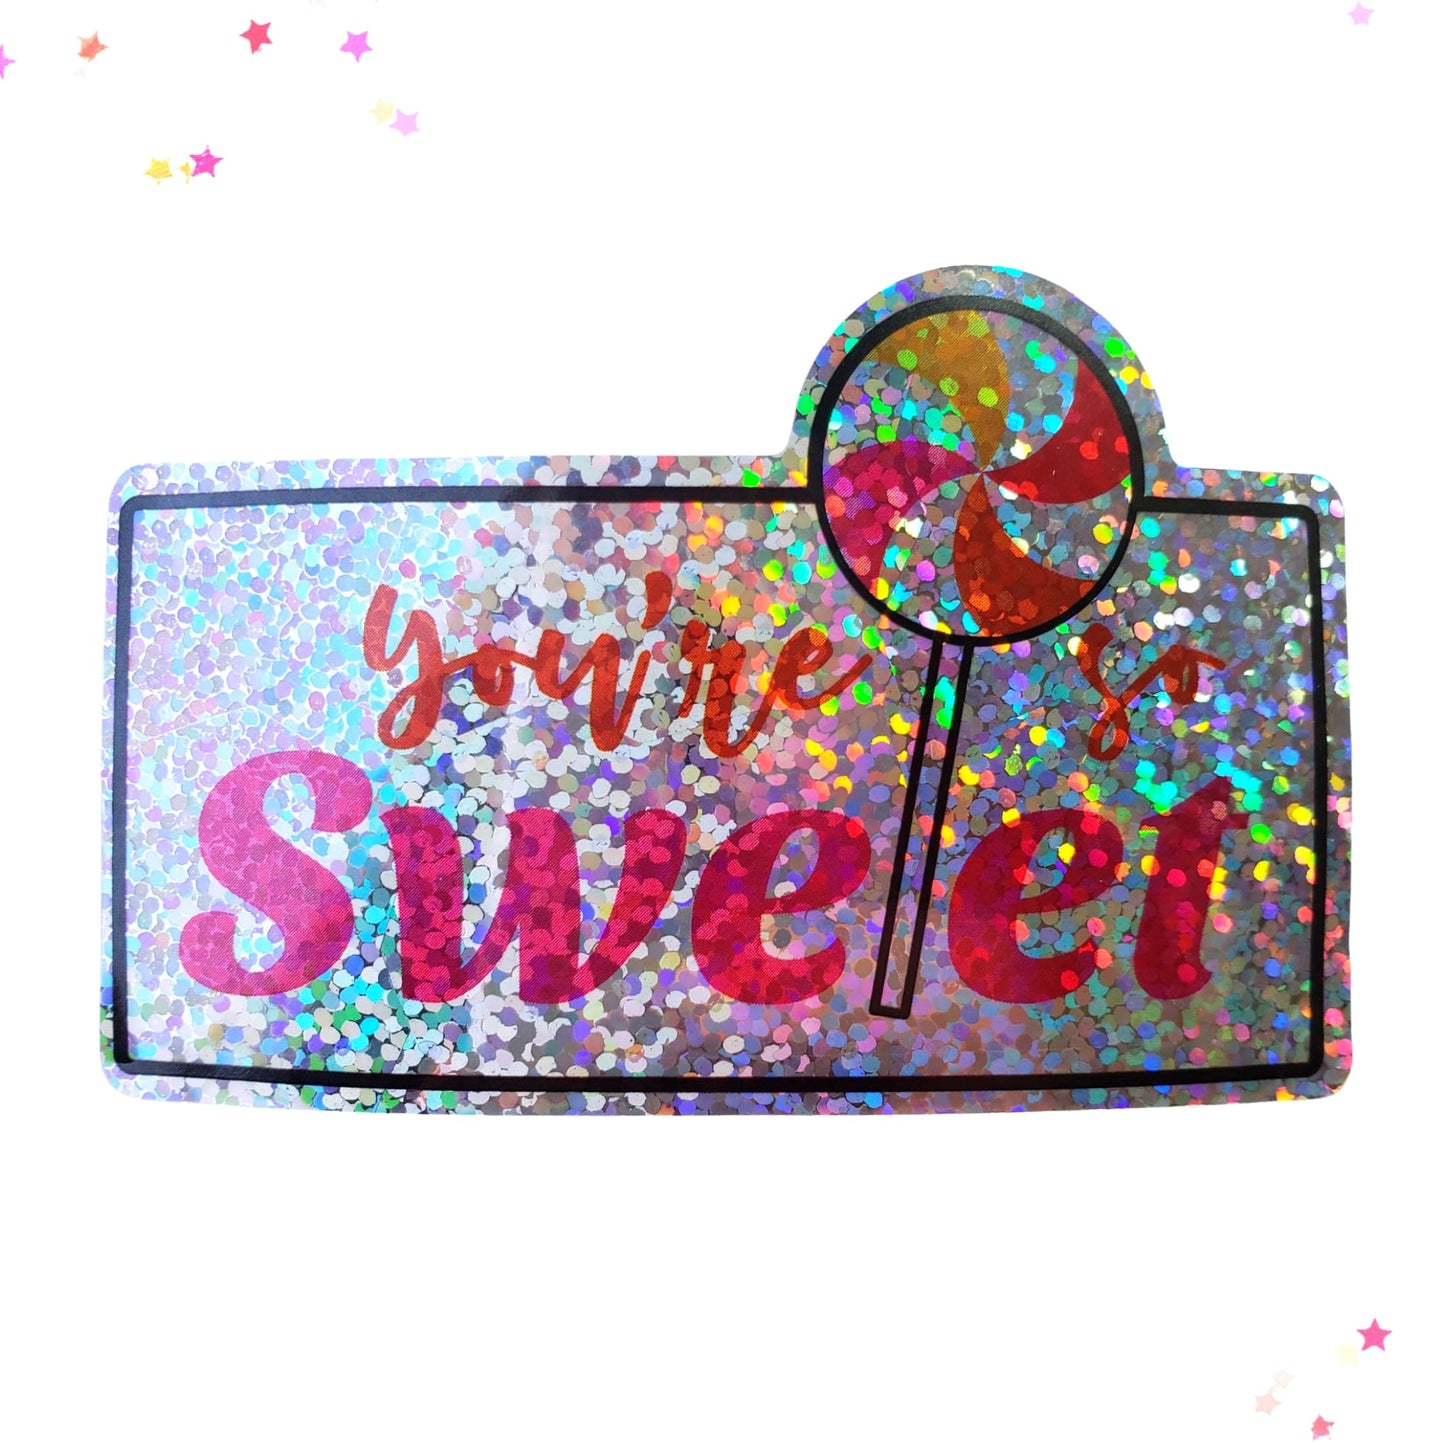 Premium Sticker - Sparkly Holographic Glitter You're So Sweet from Confetti Kitty, Only 2.00